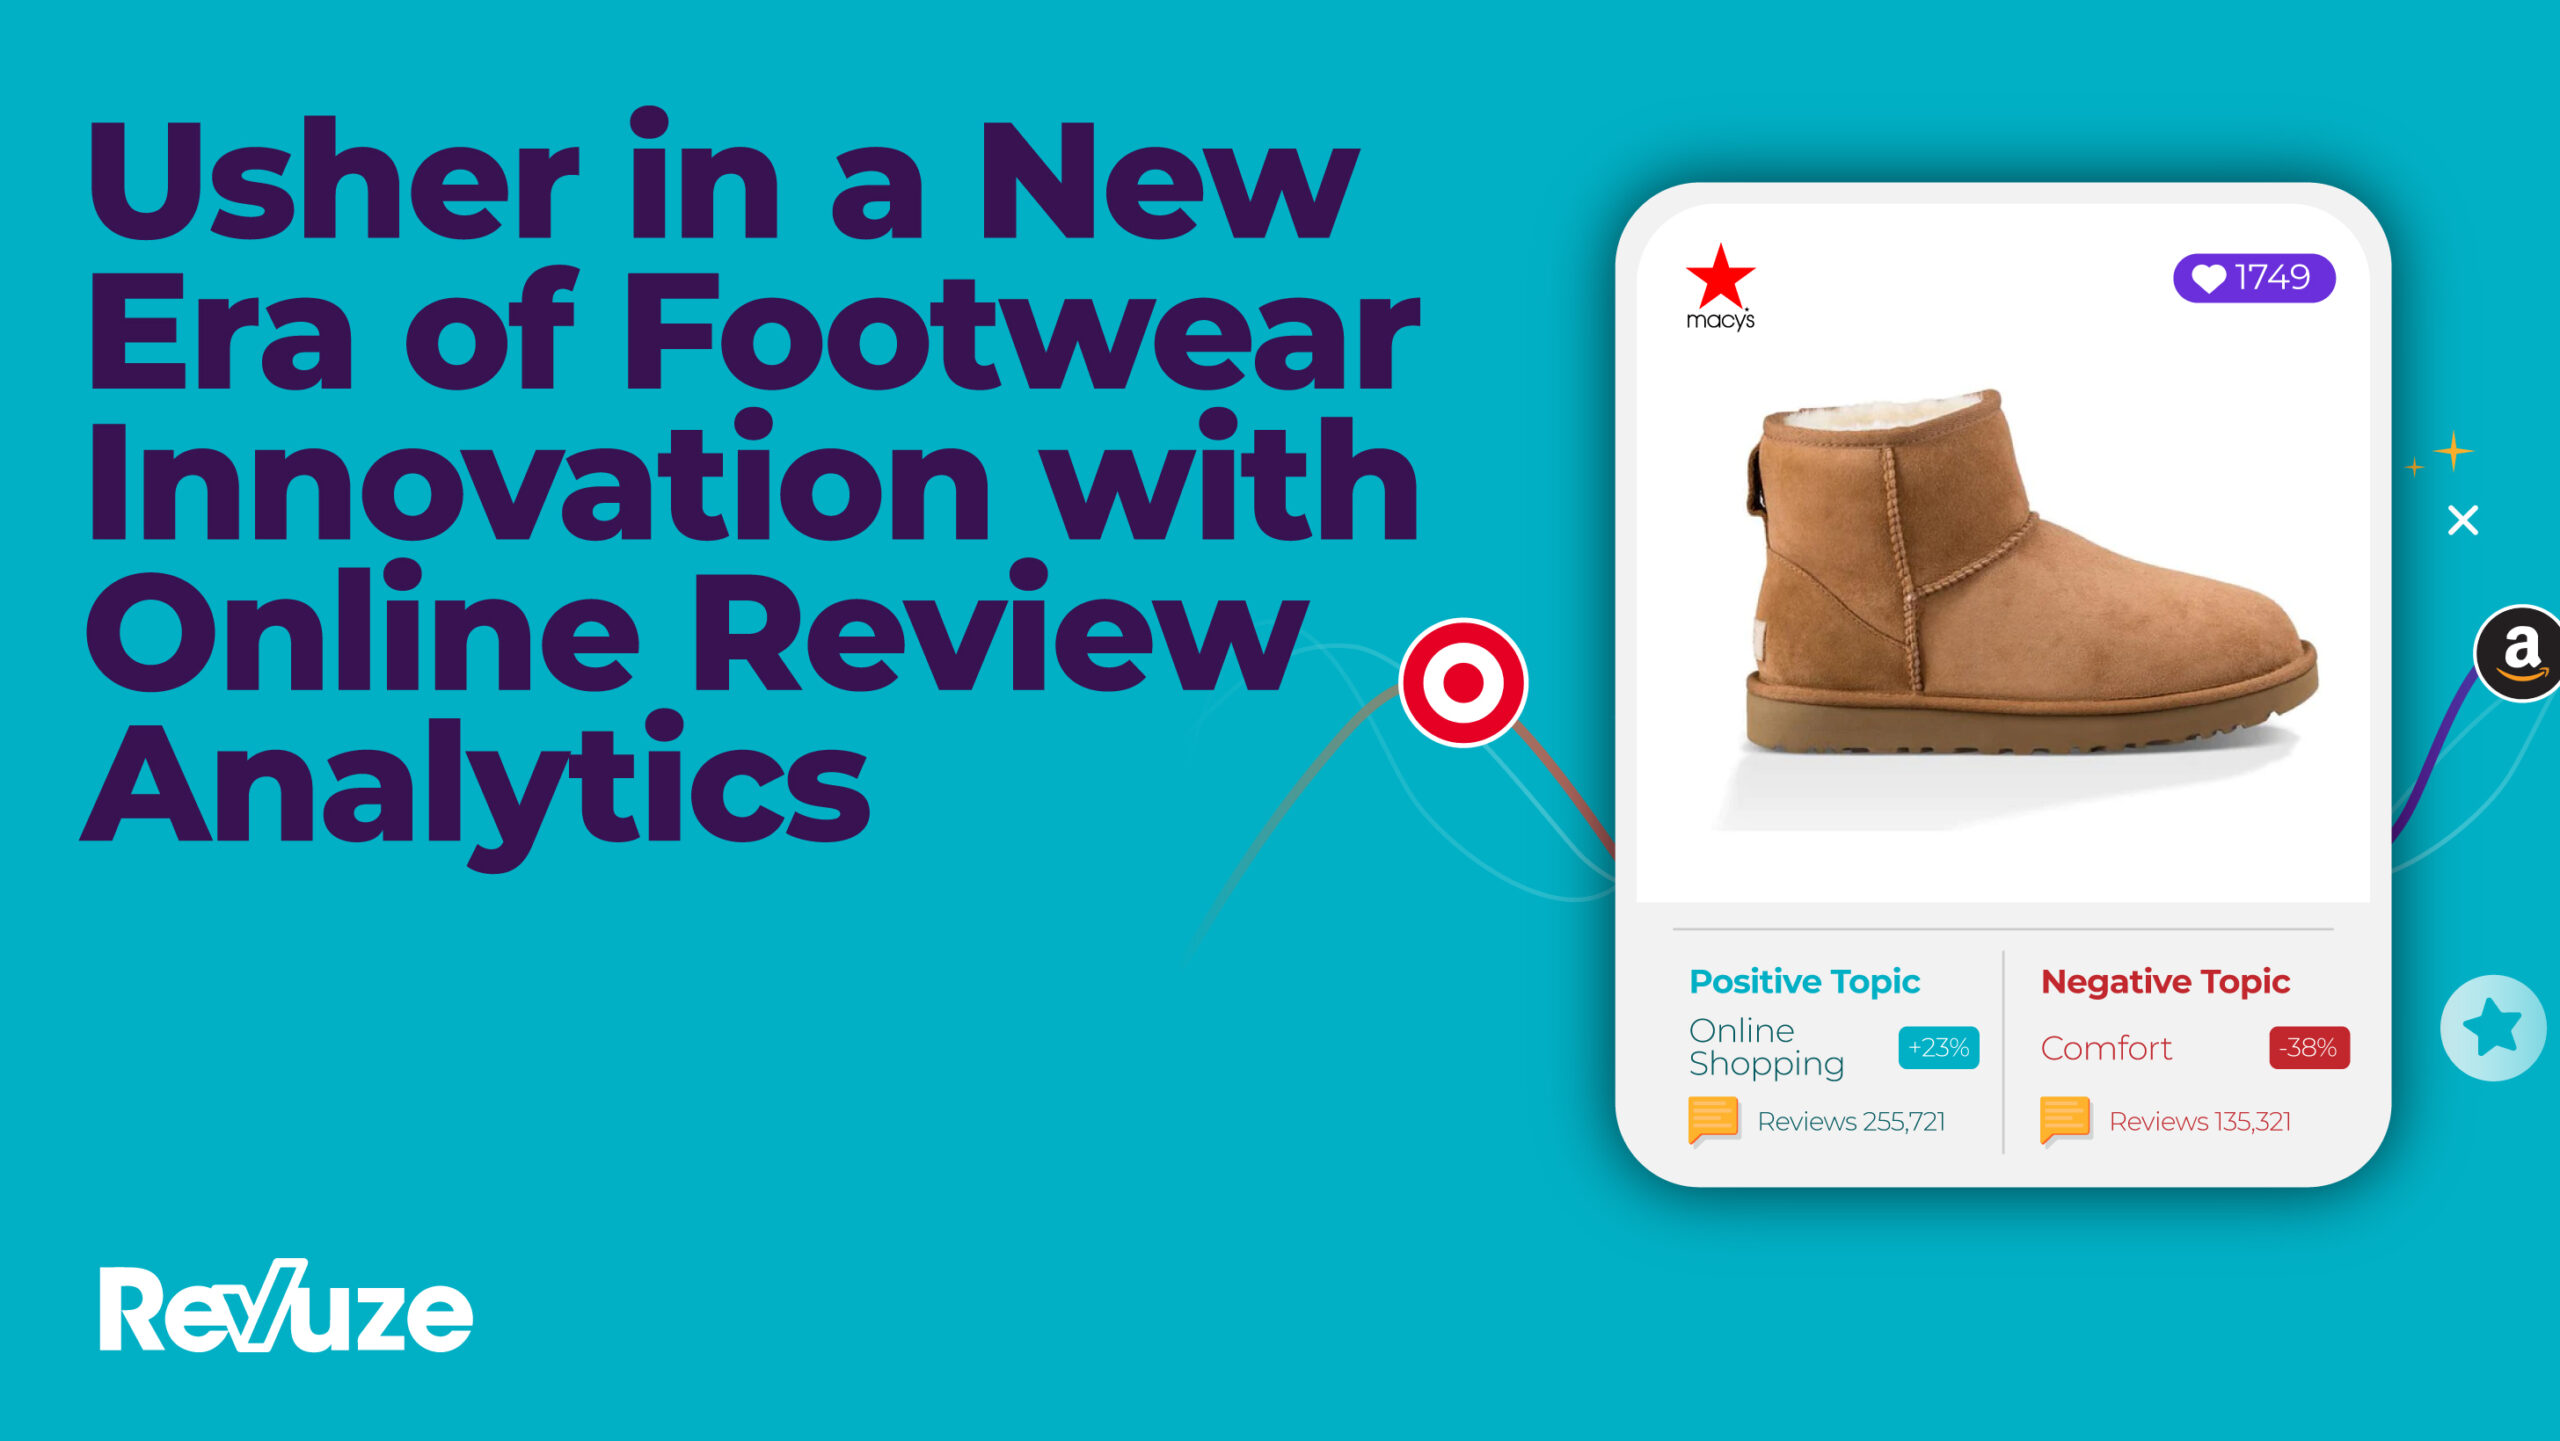 Usher in a New Era of Footwear Innovation with Online Review Analytics